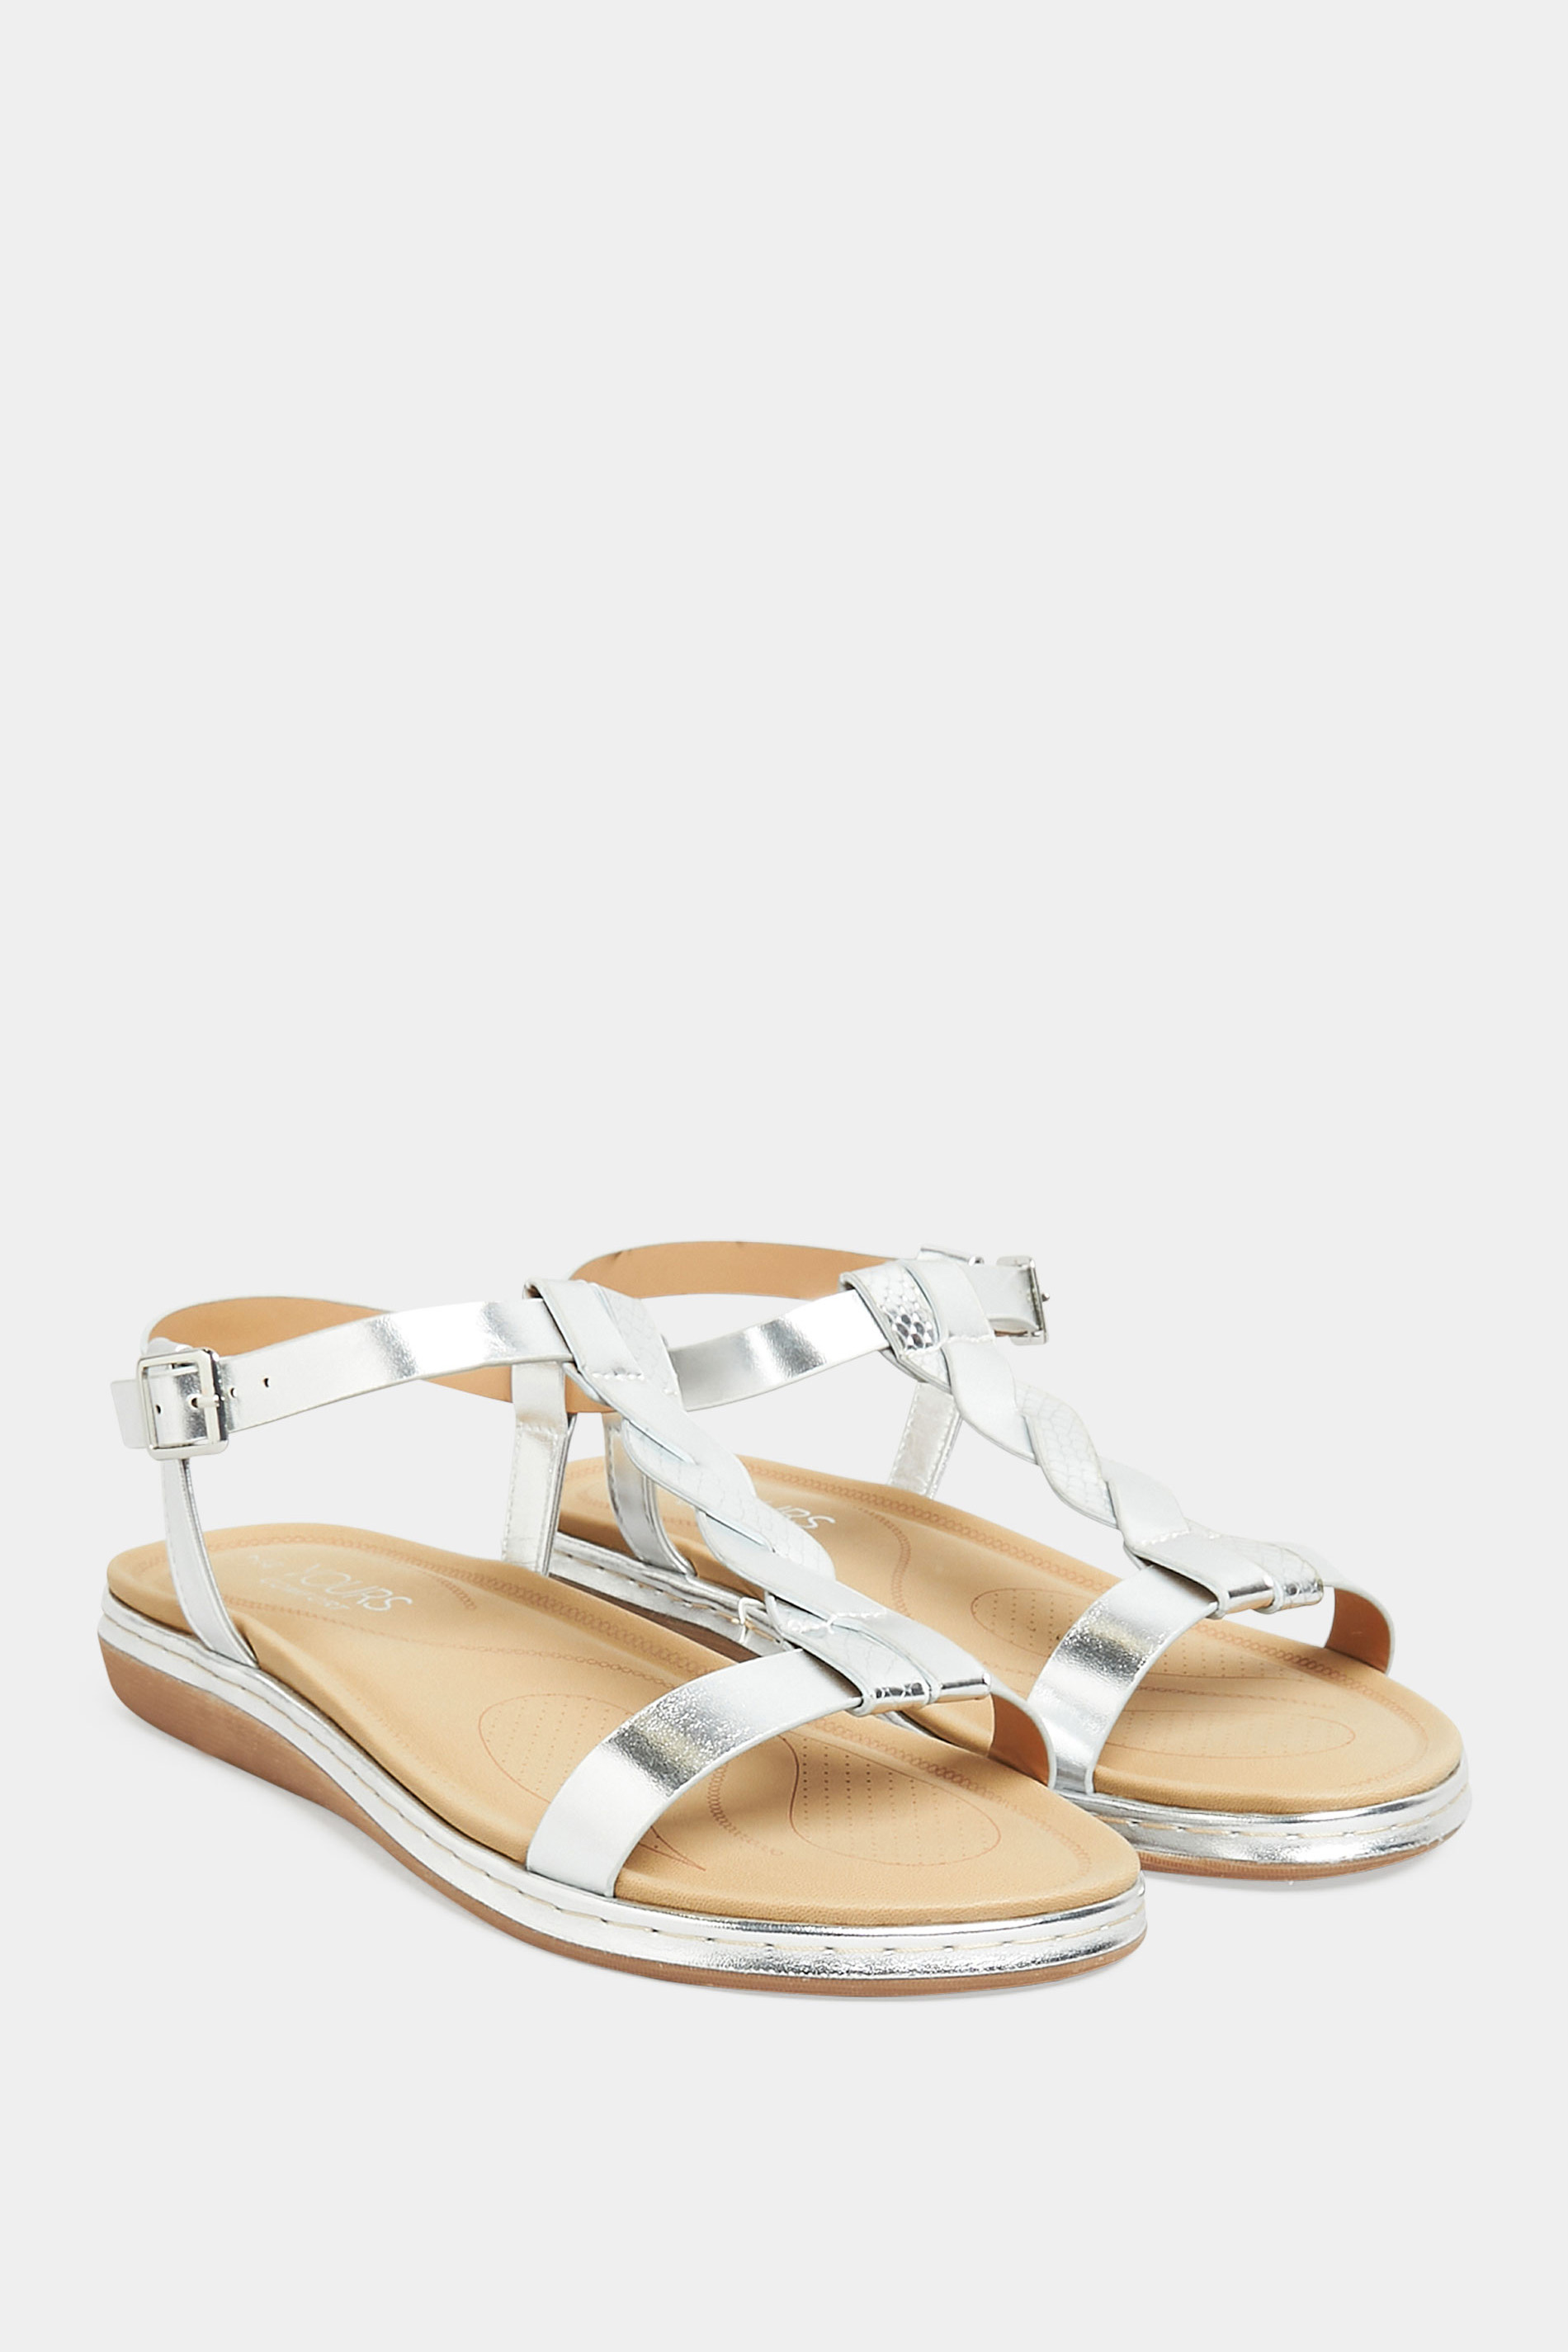 Silver Plaited Strap Sandals In Wide E Fit & Extra Wide EEE Fit | Yours Clothing 2